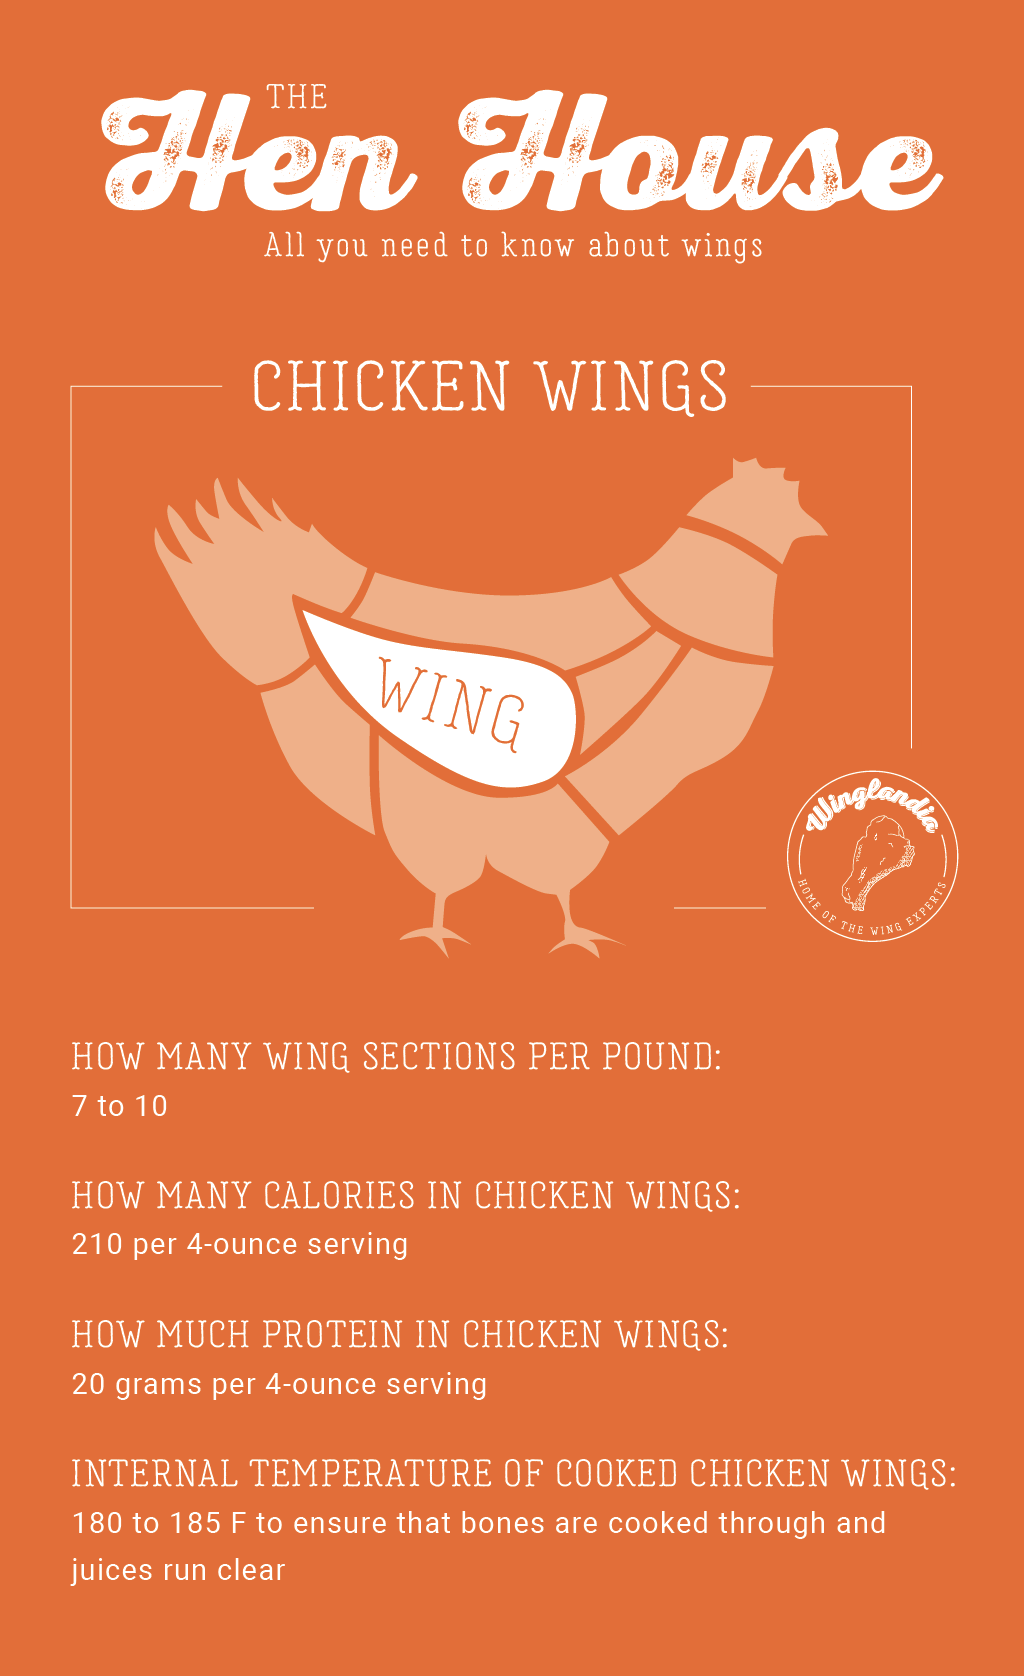 nutritional facts about chicken wings